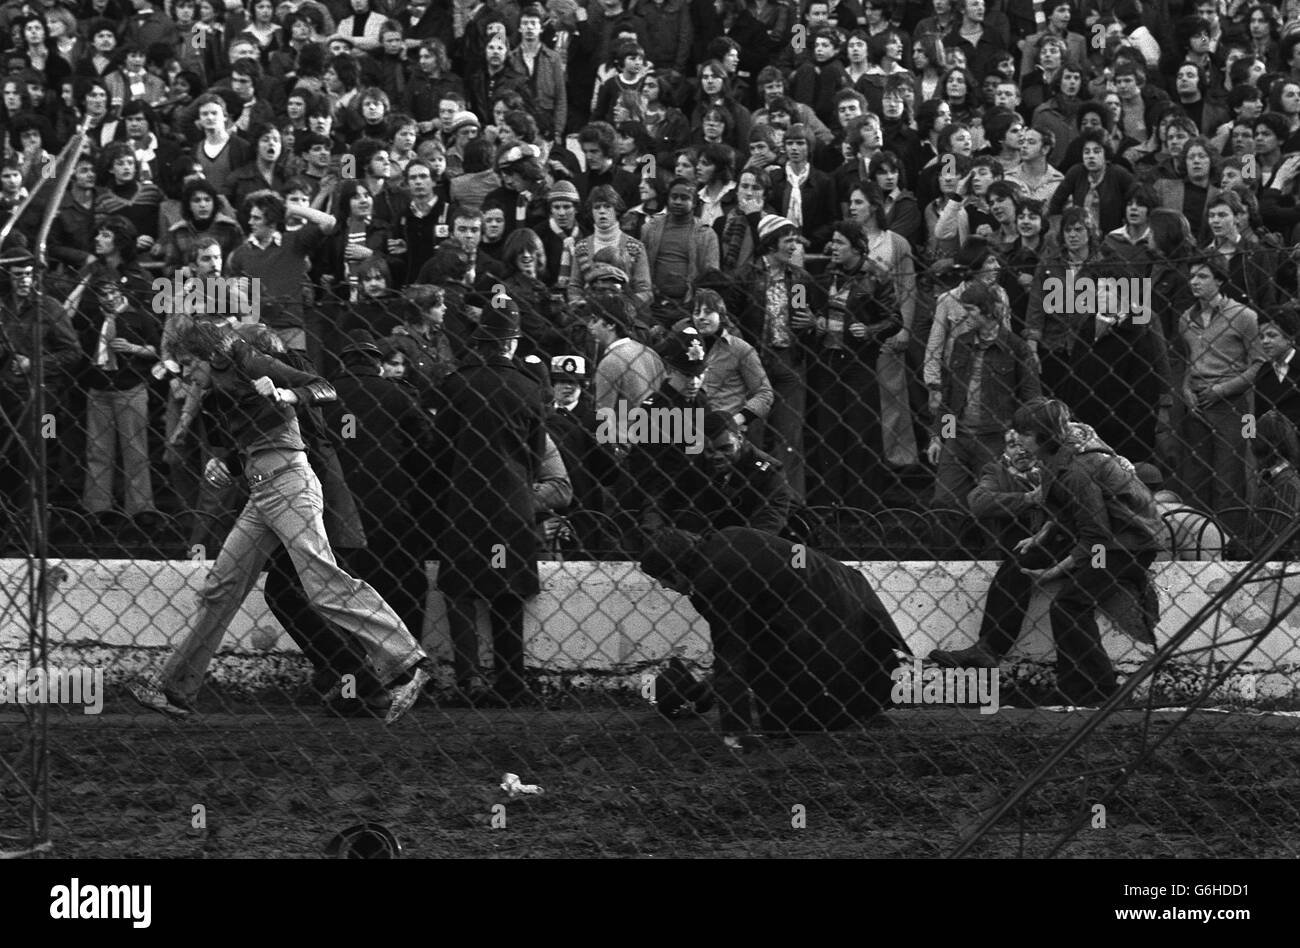 Police in Action at Chelsea. A policeman escorts a fan at Stamford Bridge, where rioting spectators spilled over the barriers before the start of Chelsea's league Division Two promotion battle against London rivals Millwall. Stock Photo